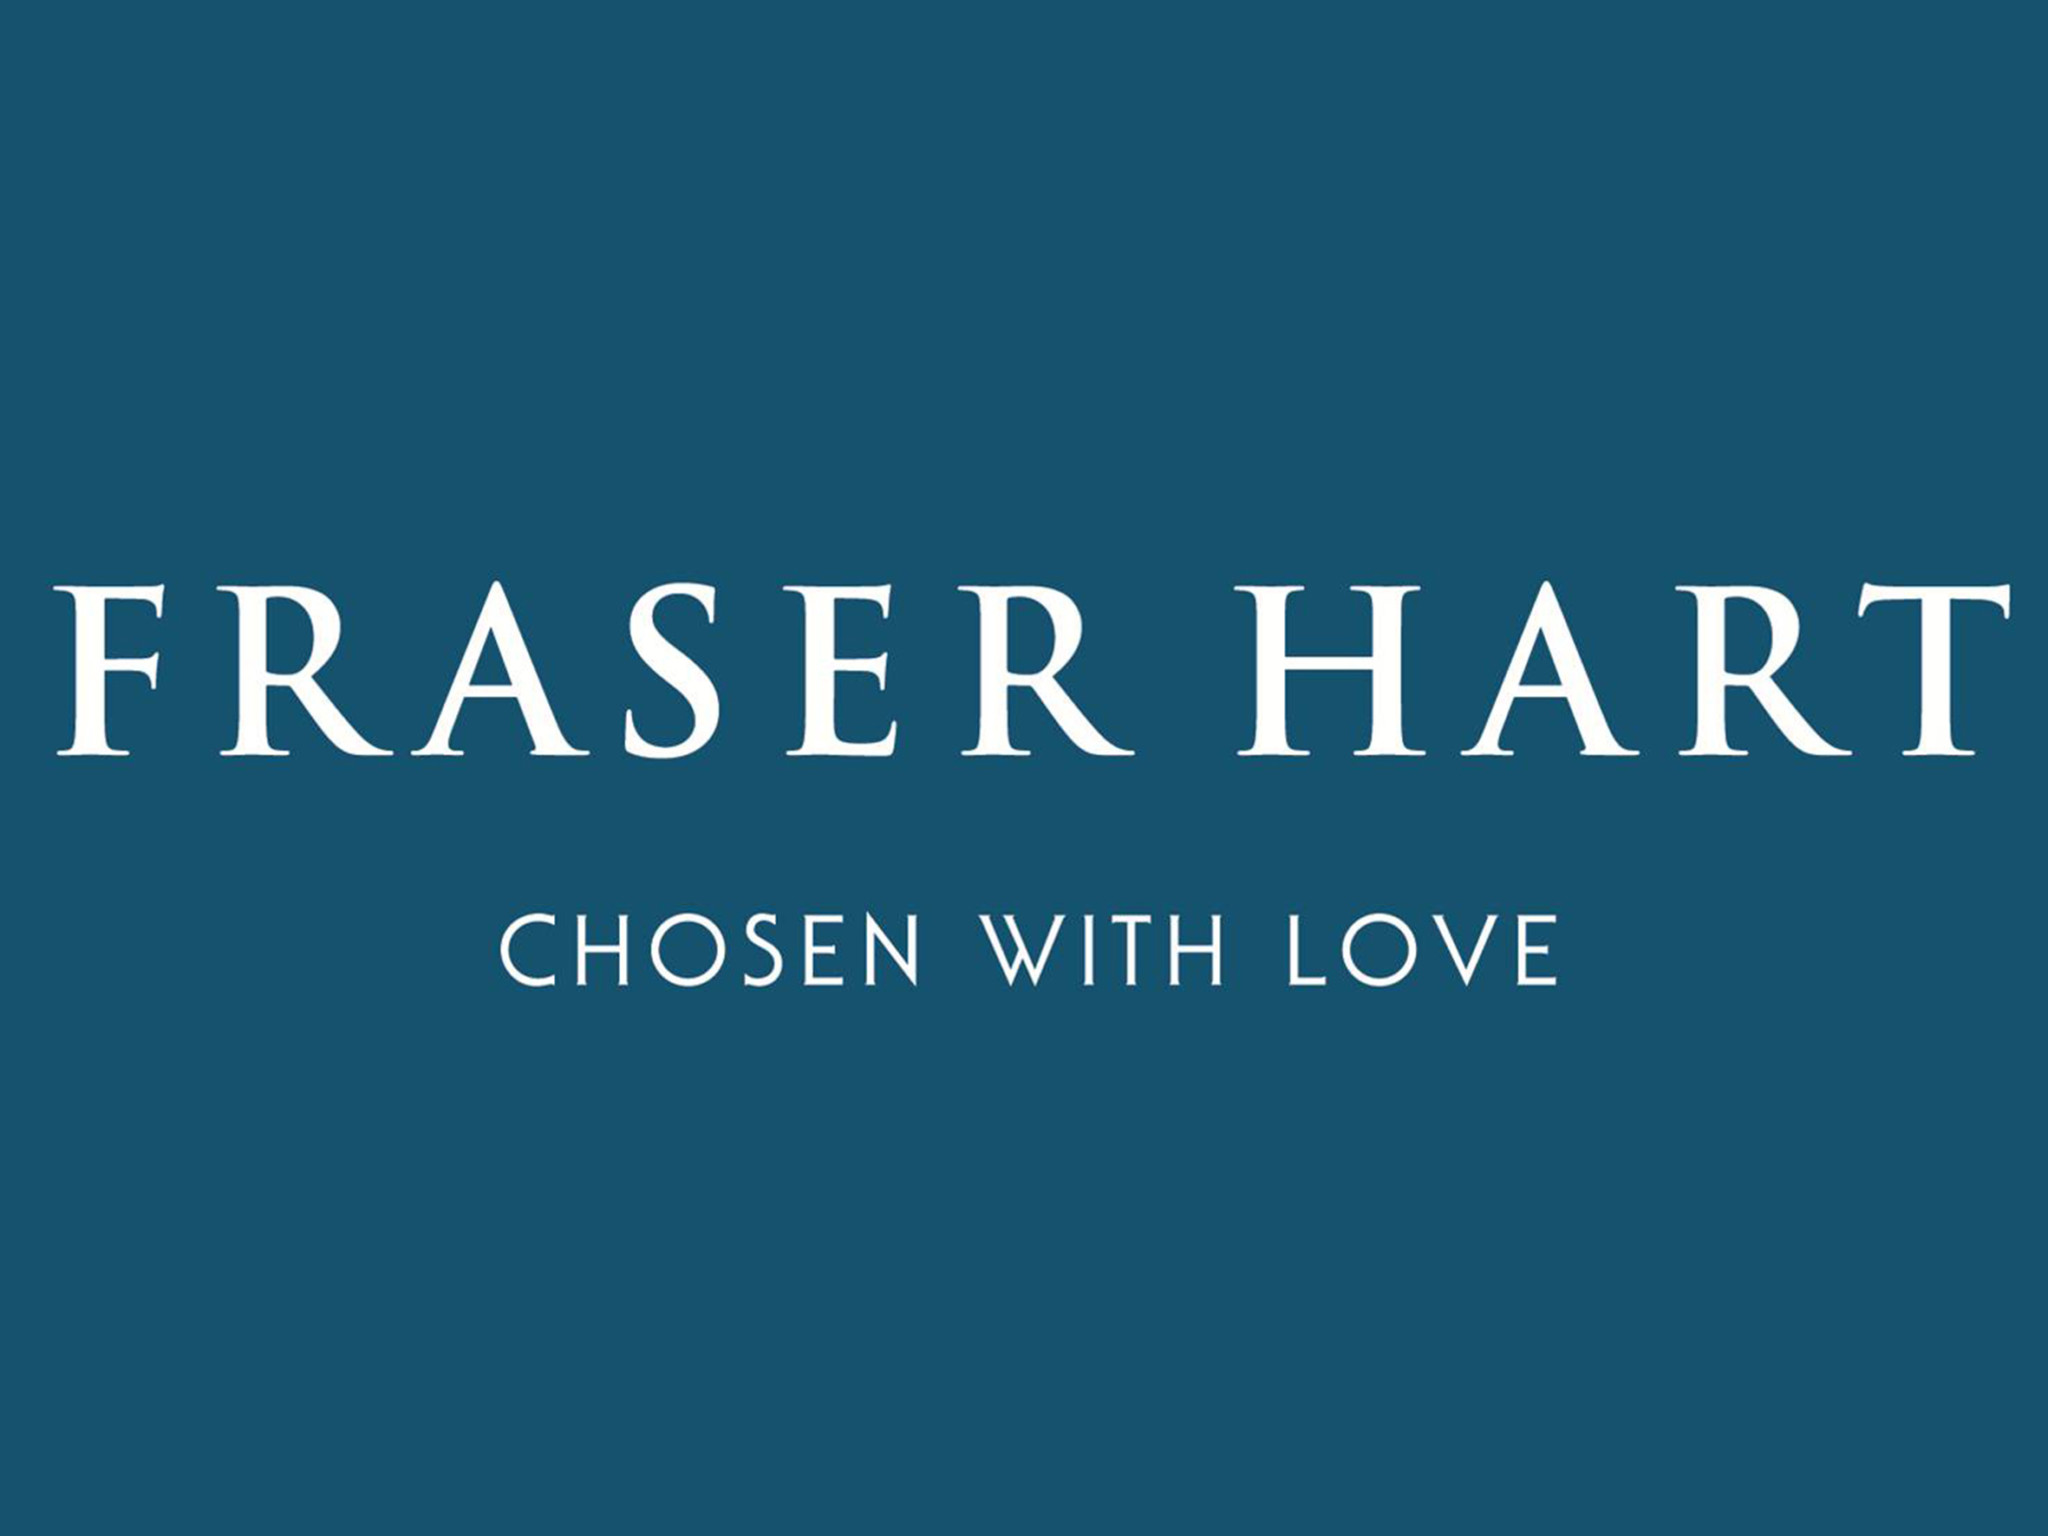 The re-positioning of fraser hart includes a new marketing message: chosen with love.